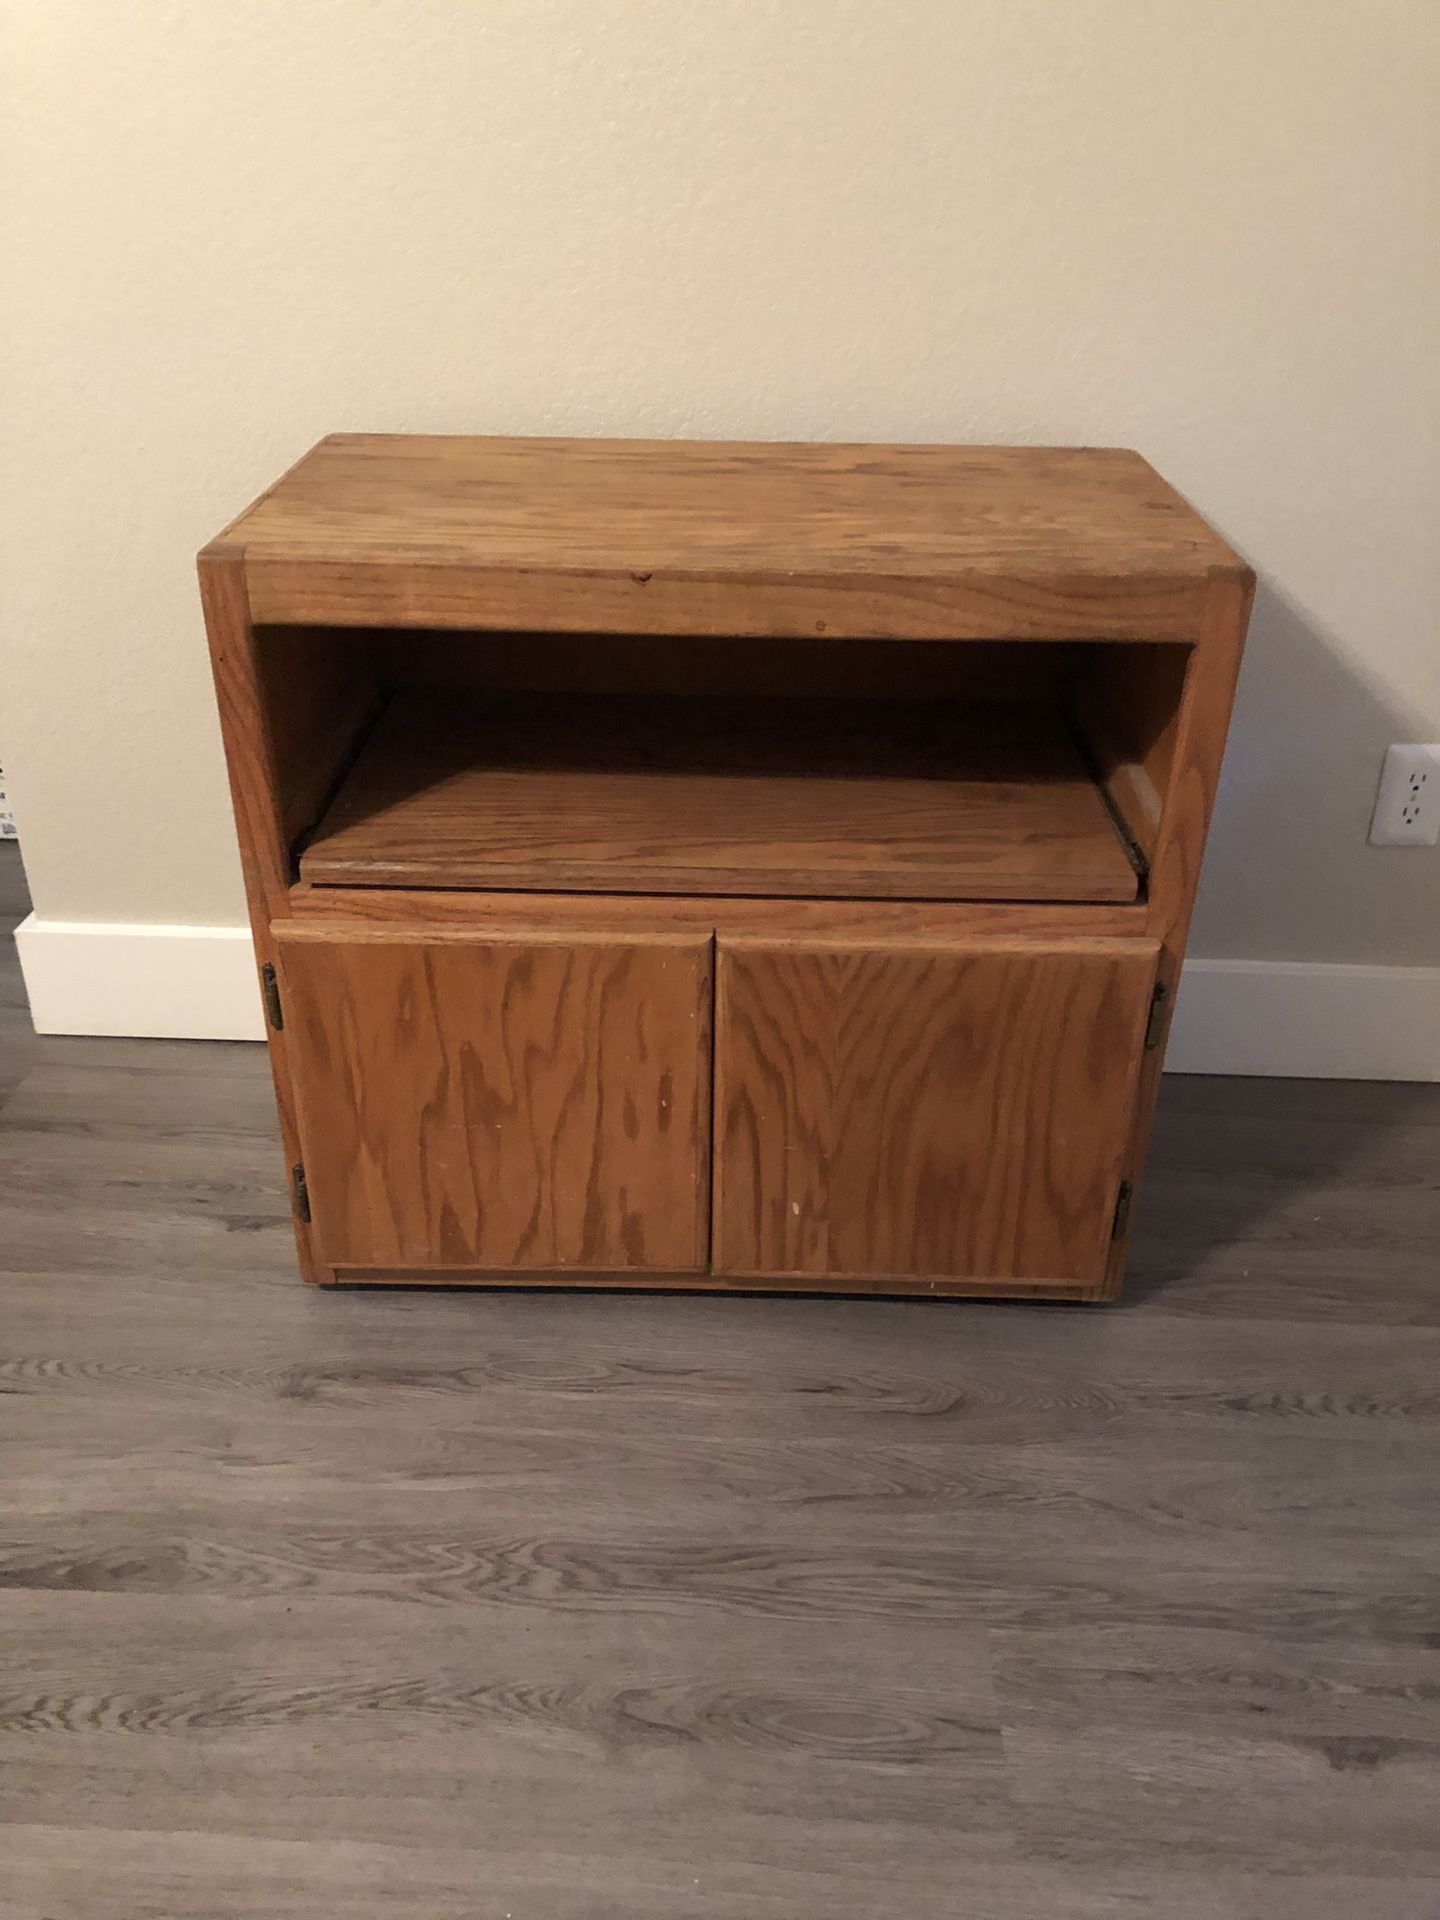 Retro, wood TV or microwave stand. H- 29”, W-31”, D-18”